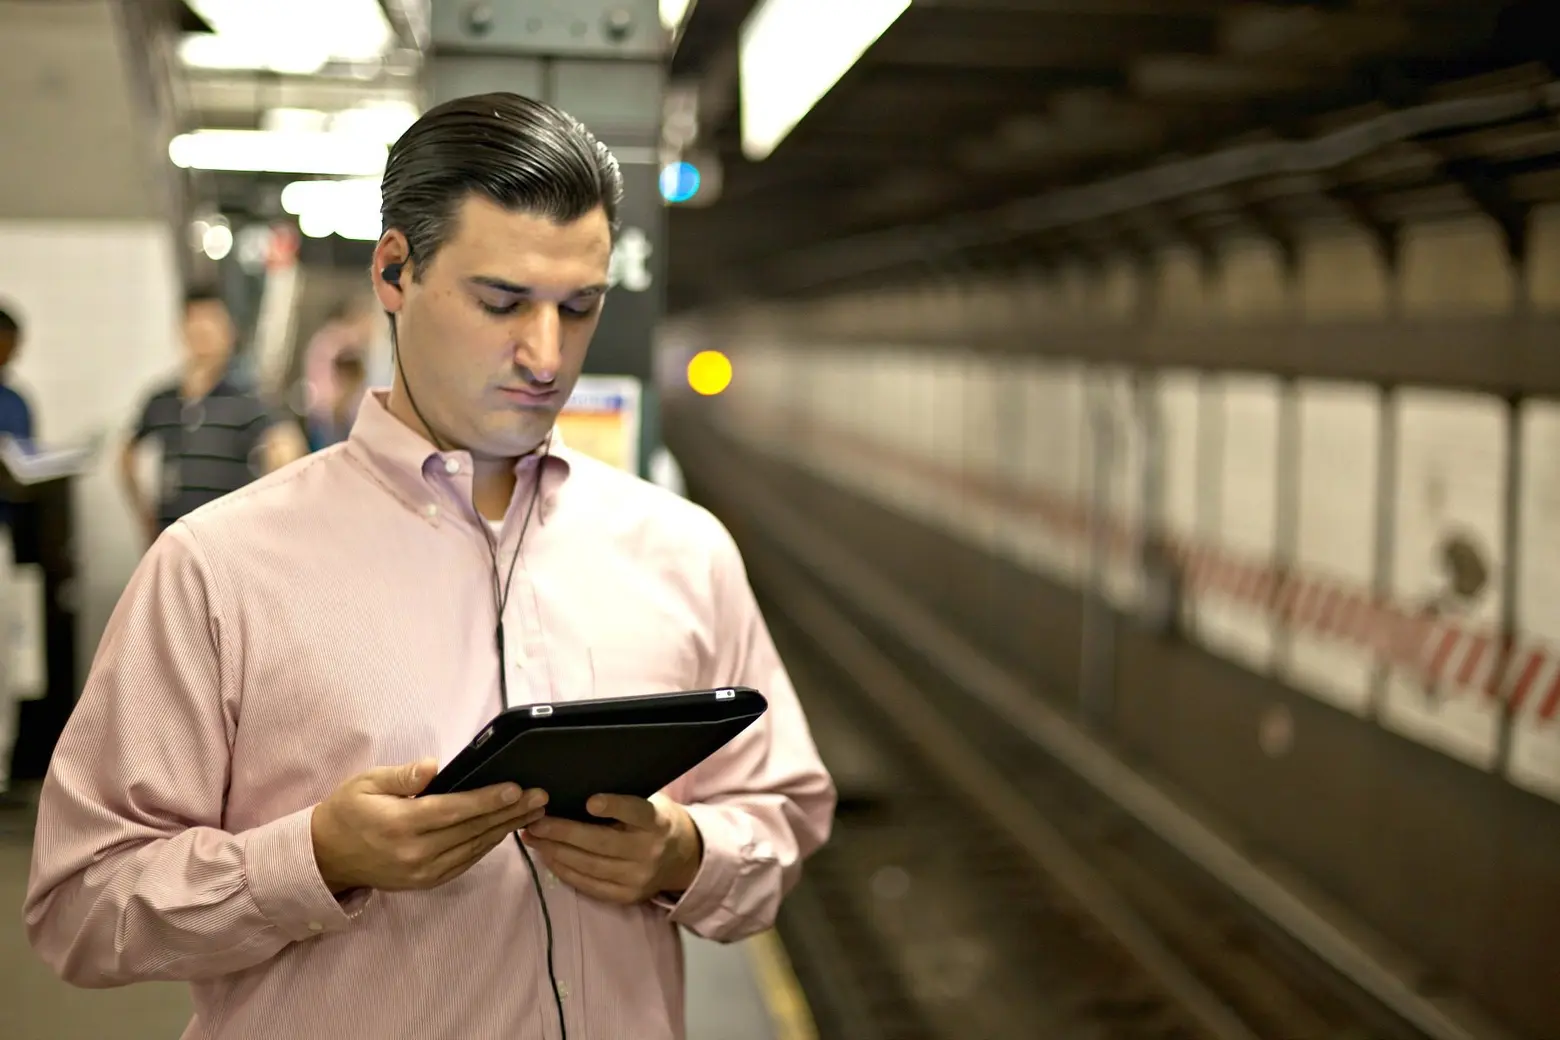 Subway Reads offers free e-books based on the length of your commute